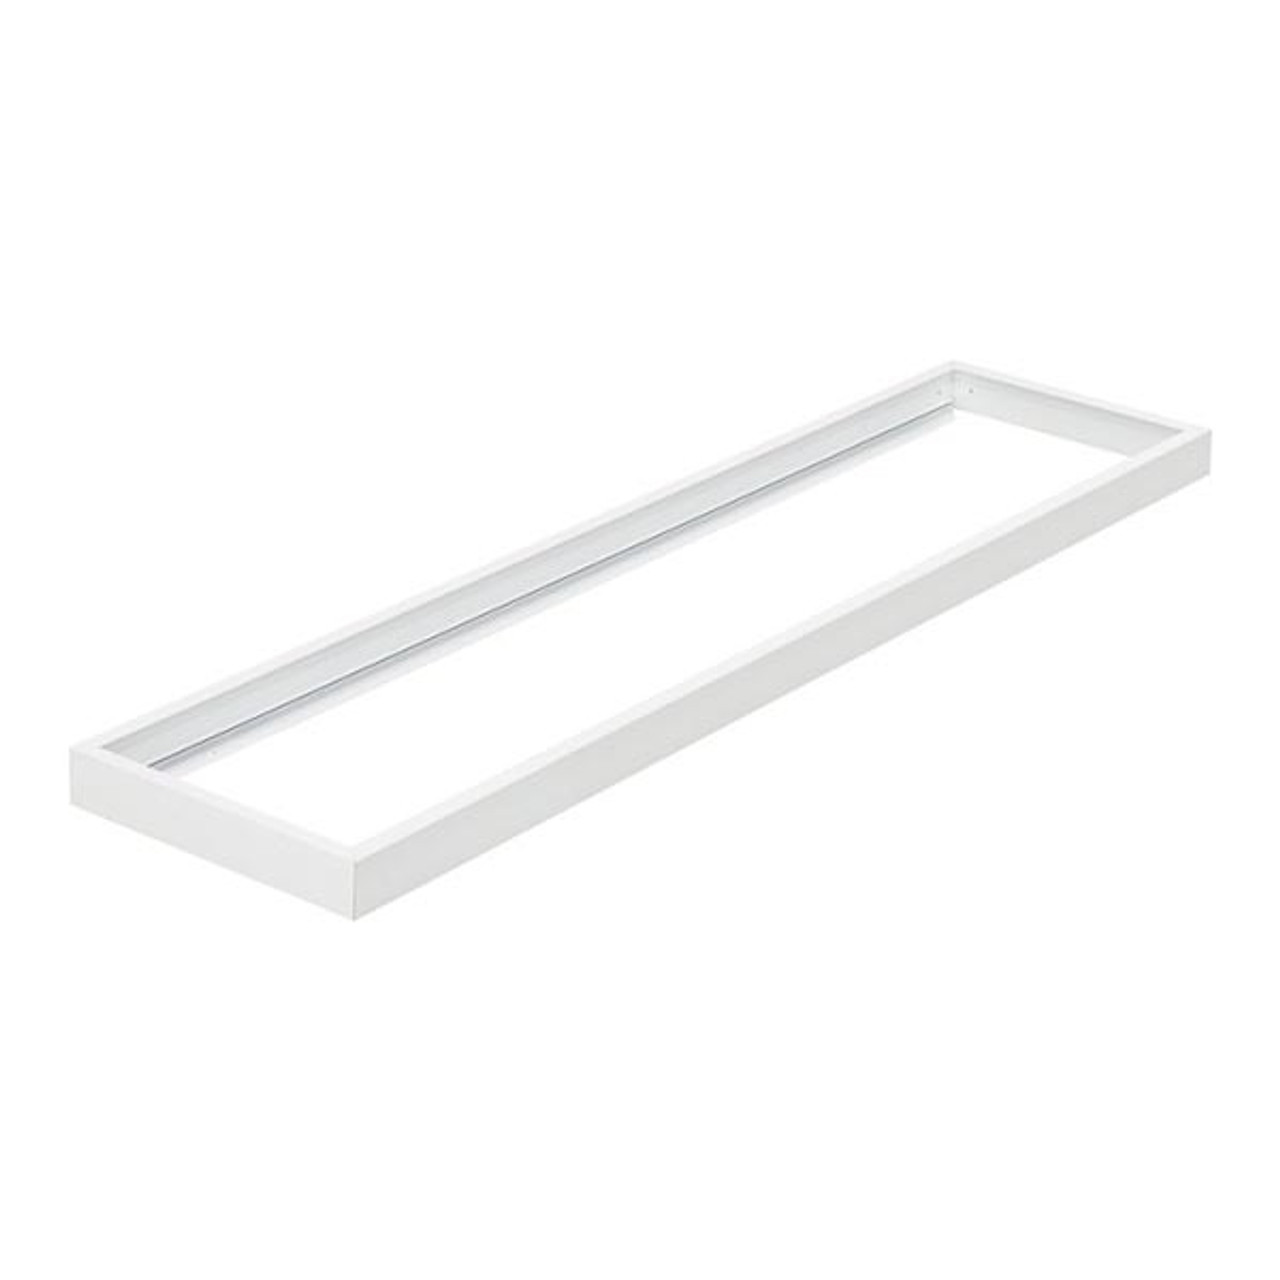 RC132Z SMB W30L120 Surface Mounting Box White for 300mm x 1200mm LED Panel